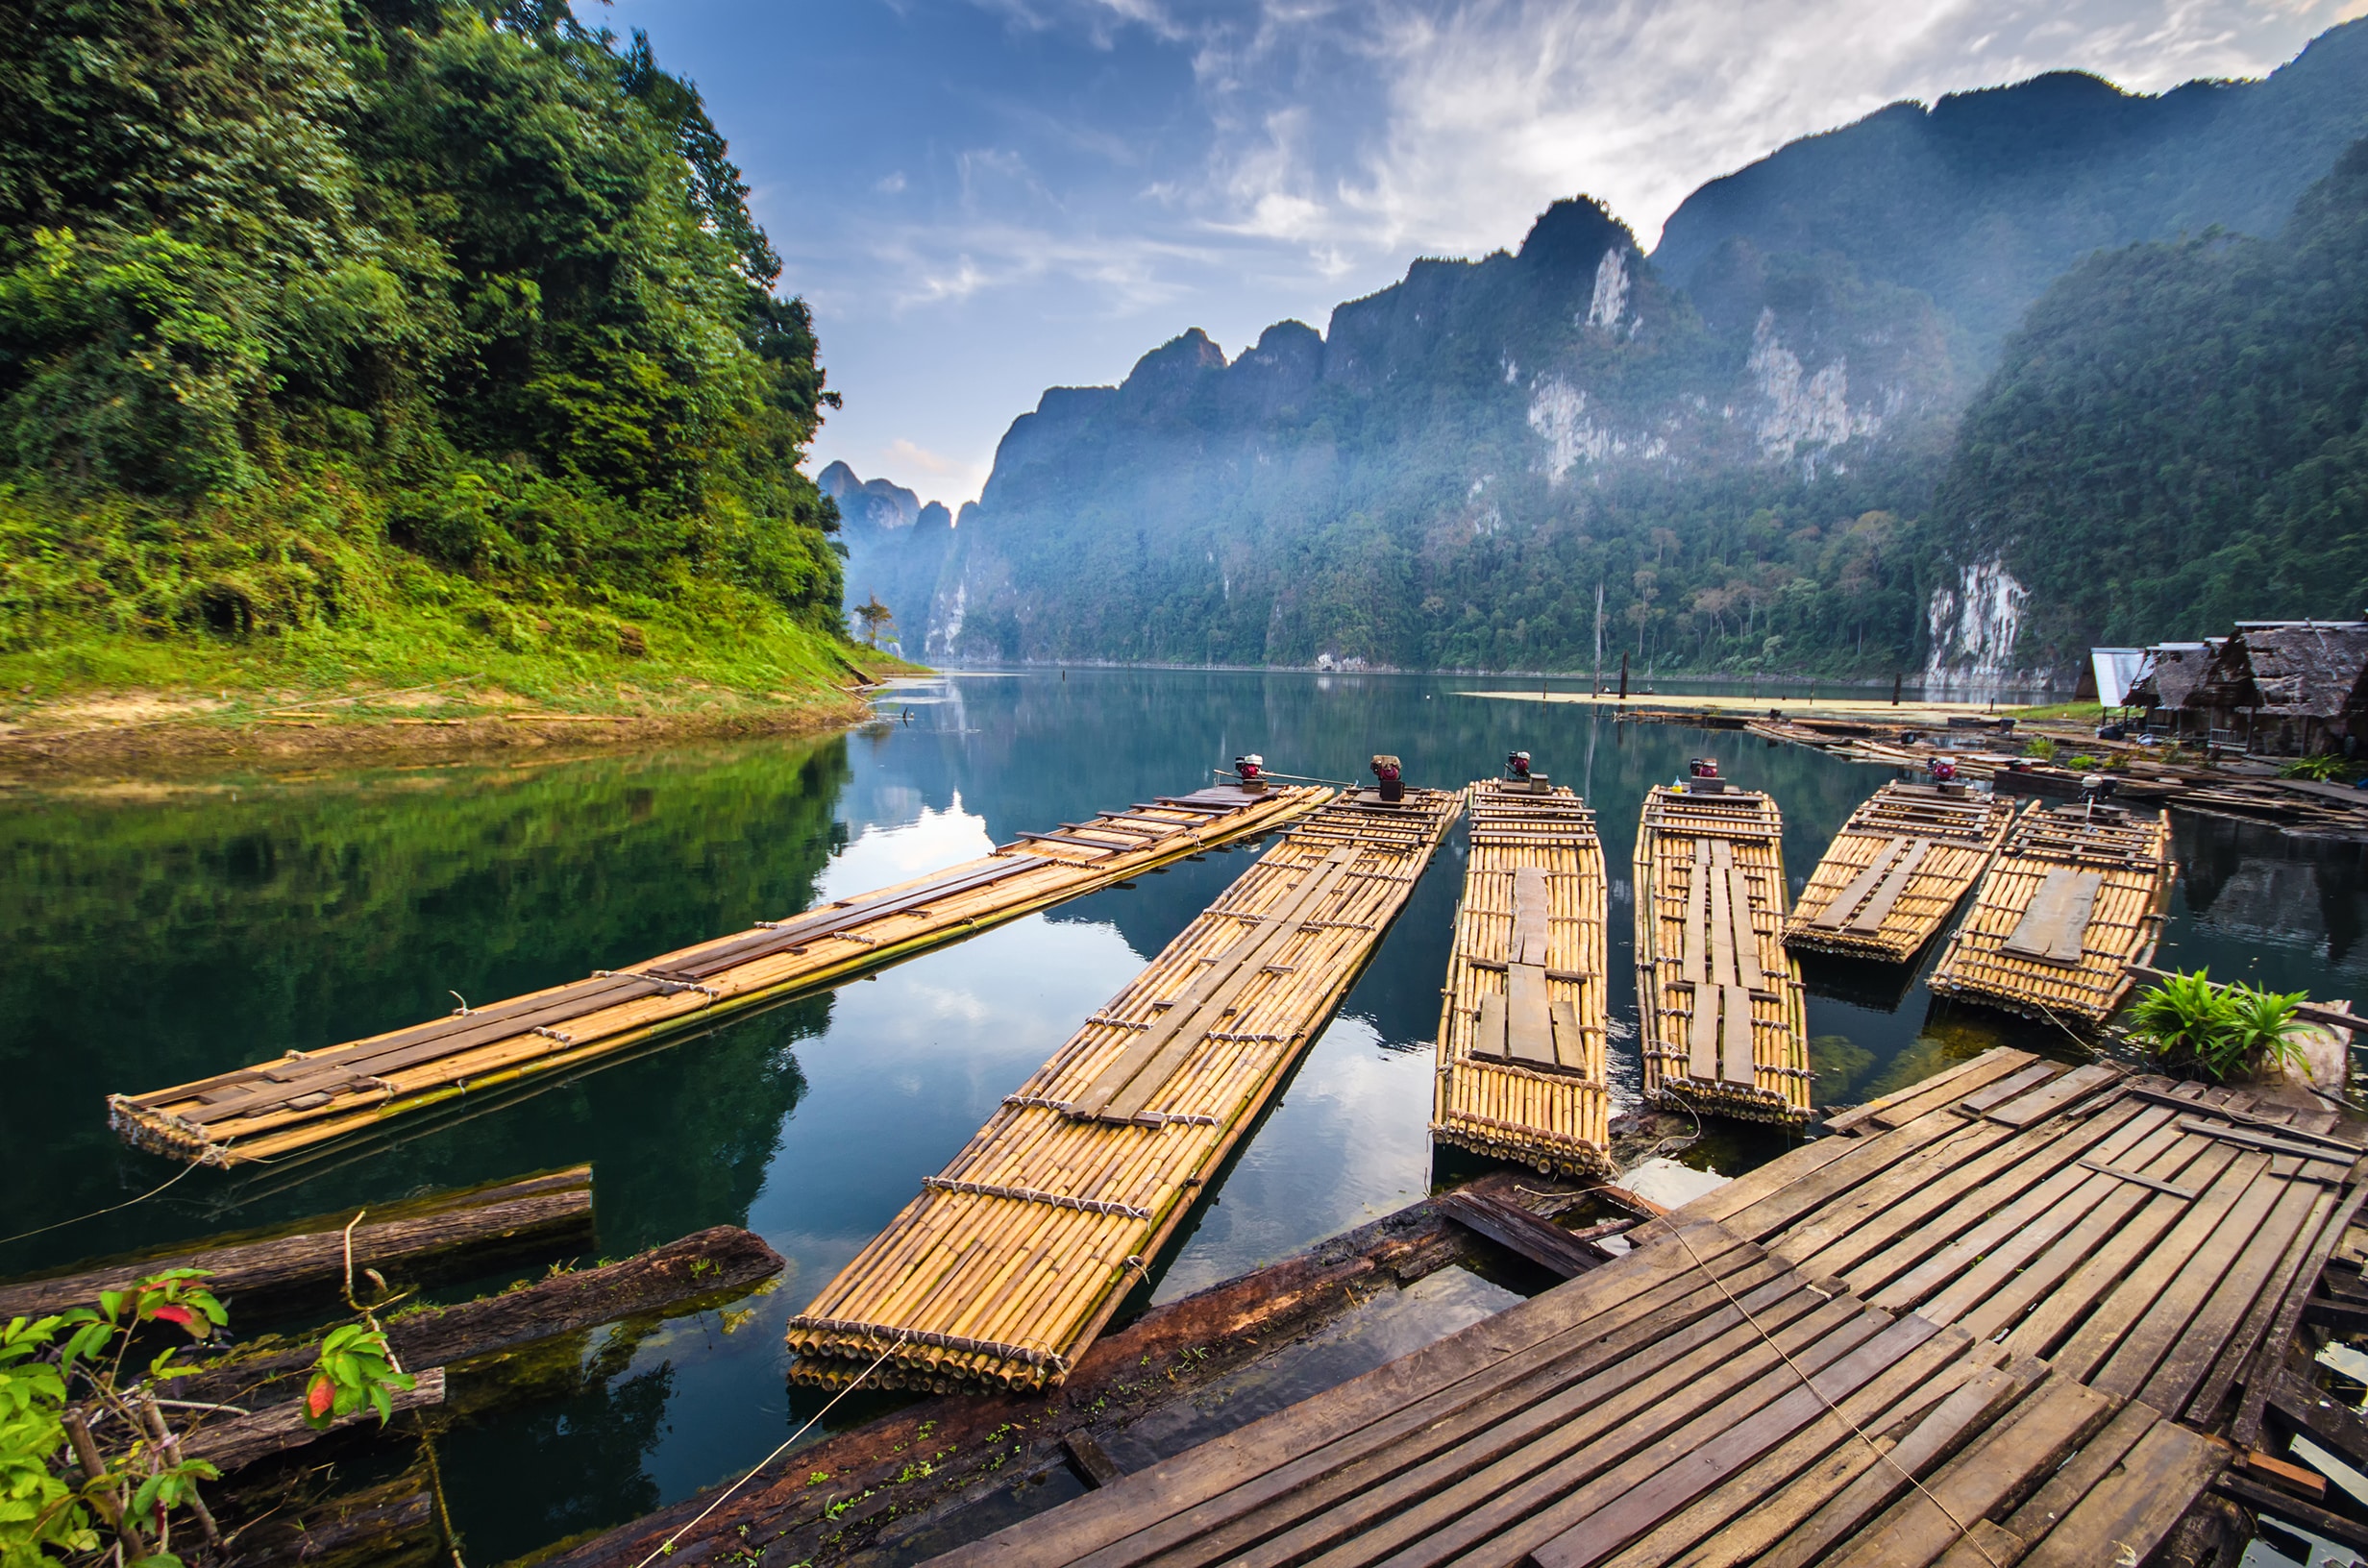 Bamboo rafts moored to a deck with mountains behind